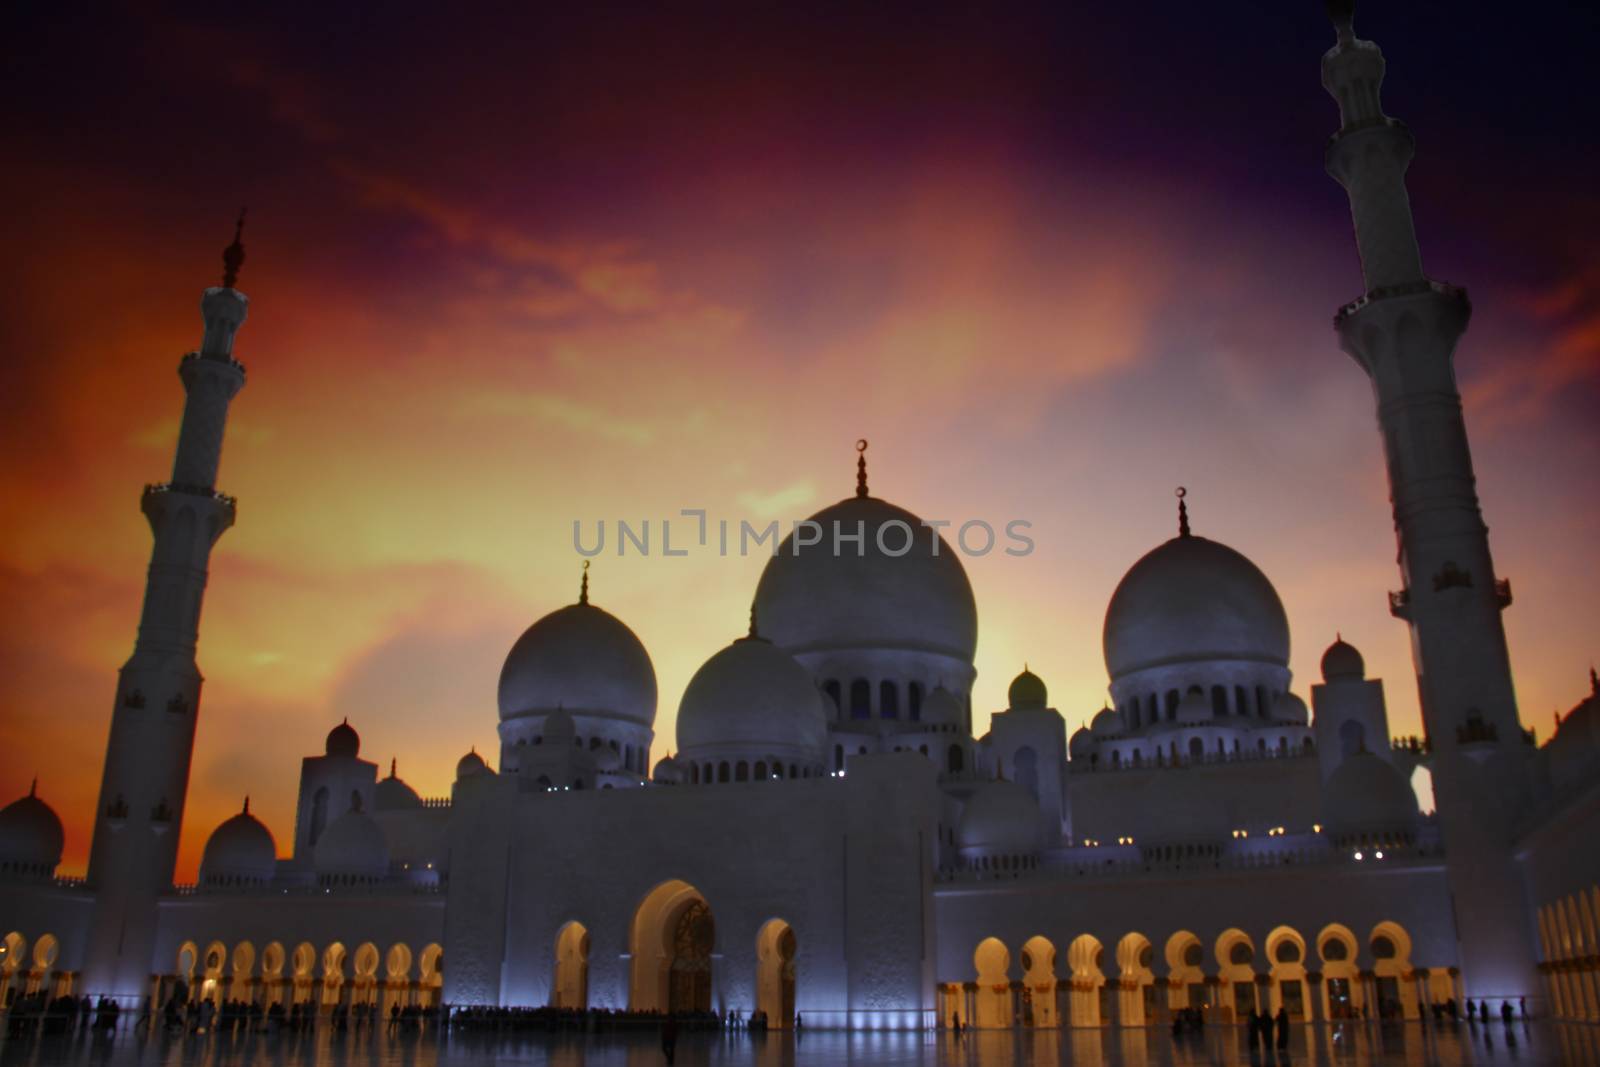 The Grand Mosque of Abu Dhabi at Dusk with beautiful twilight skies